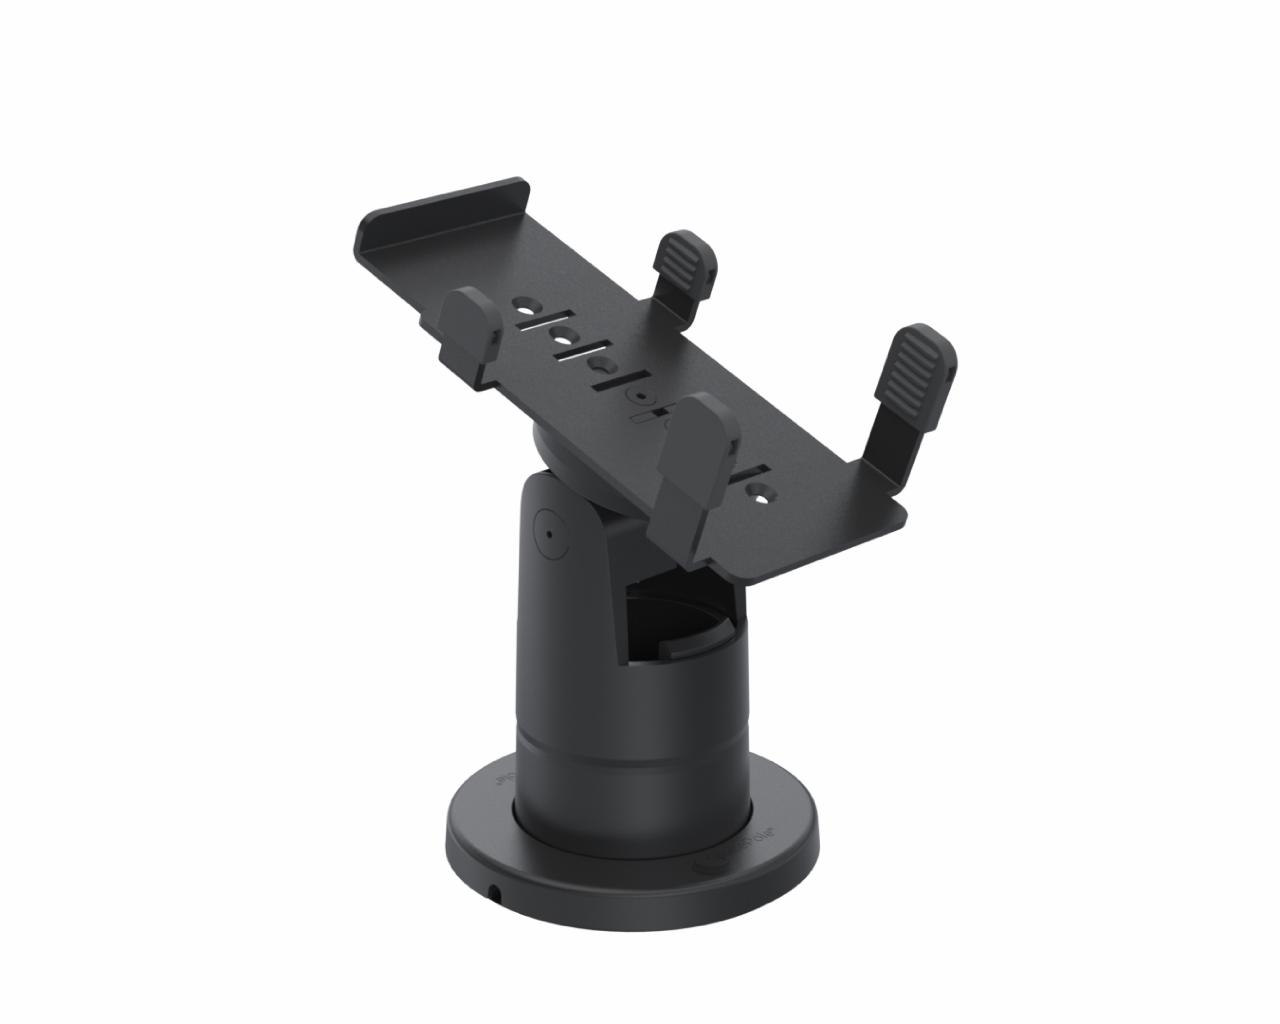 SpacePole Stack with MultiGrip plate for Verifone V400m